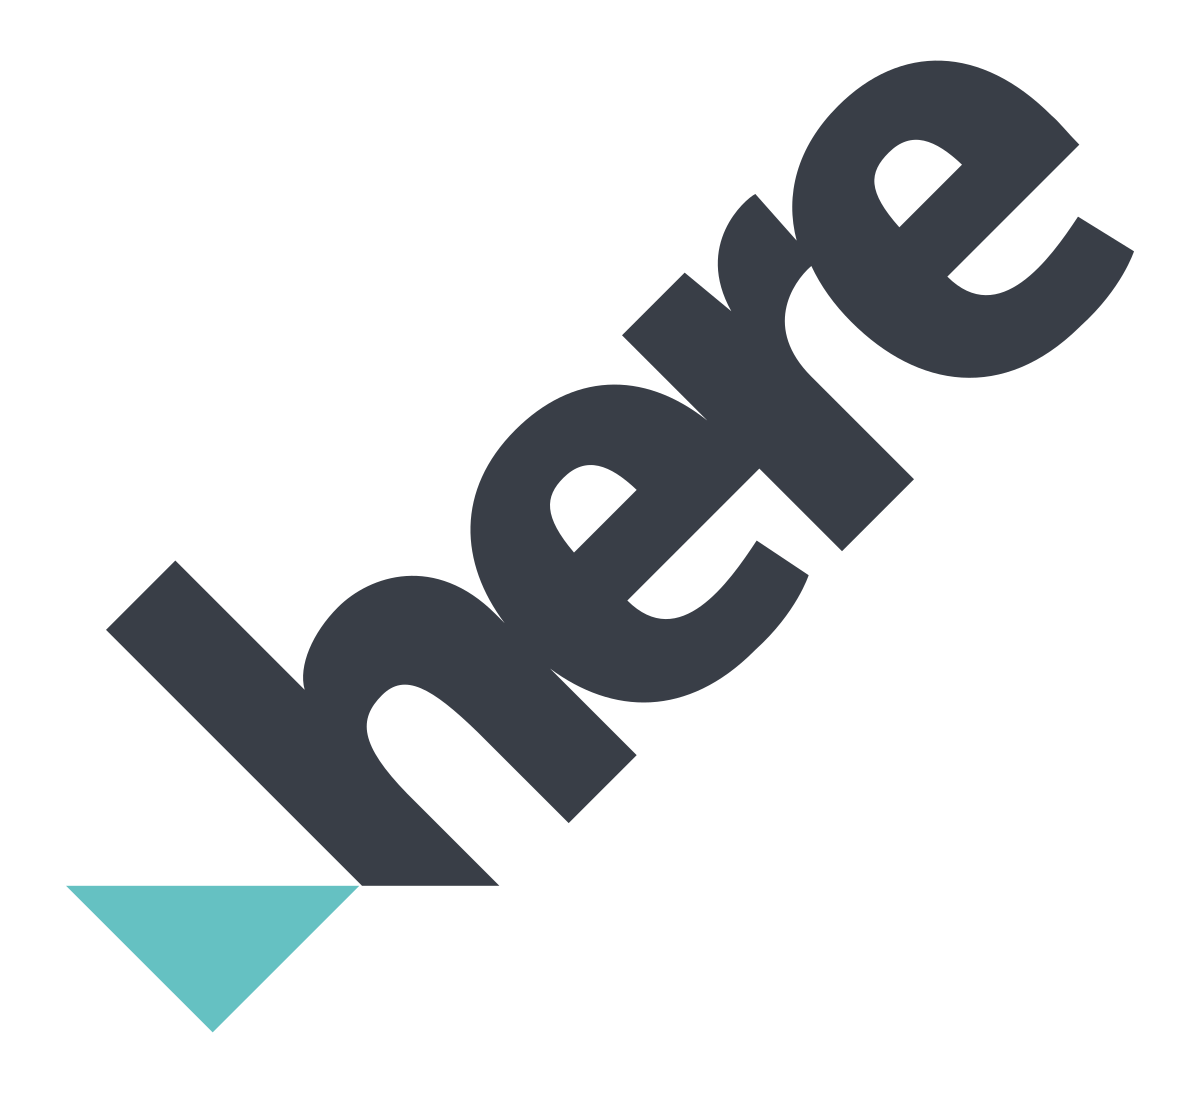 here_logo.svg.png